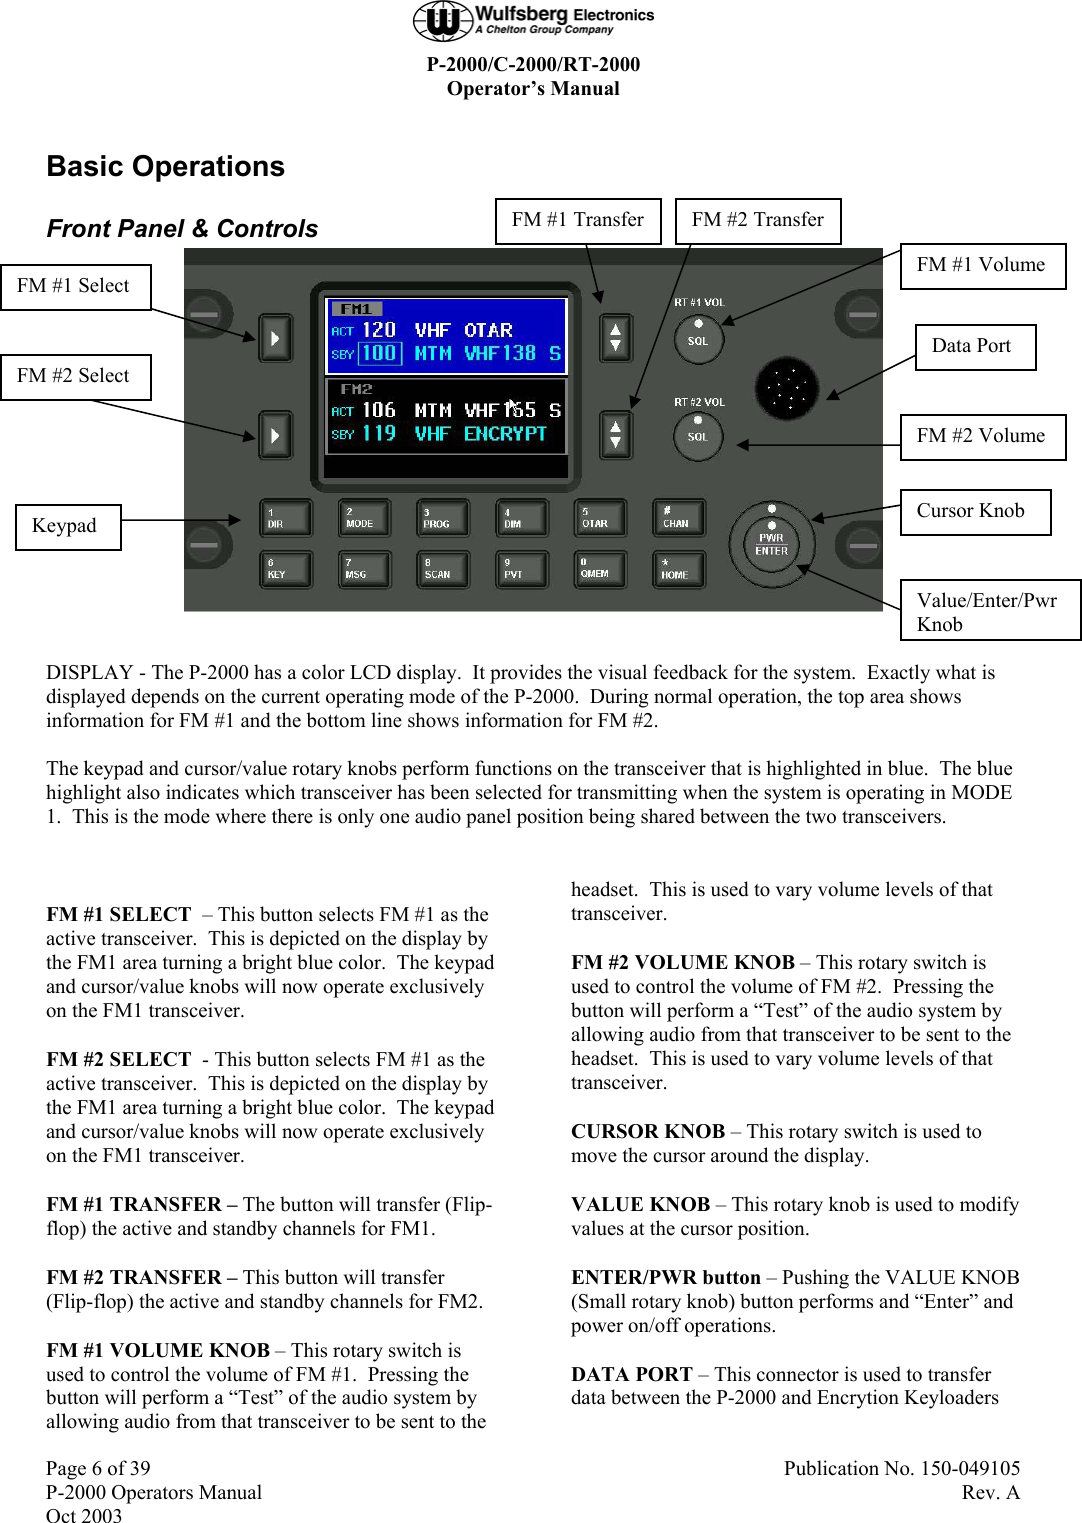  P-2000/C-2000/RT-2000 Operator’s Manual  Page 6 of 39  Publication No. 150-049105 P-2000 Operators Manual  Rev. A Oct 2003 Basic Operations Front Panel &amp; Controls   DISPLAY - The P-2000 has a color LCD display.  It provides the visual feedback for the system.  Exactly what is displayed depends on the current operating mode of the P-2000.  During normal operation, the top area shows information for FM #1 and the bottom line shows information for FM #2.  The keypad and cursor/value rotary knobs perform functions on the transceiver that is highlighted in blue.  The blue highlight also indicates which transceiver has been selected for transmitting when the system is operating in MODE 1.  This is the mode where there is only one audio panel position being shared between the two transceivers.  FM #1 SELECT  – This button selects FM #1 as the active transceiver.  This is depicted on the display by the FM1 area turning a bright blue color.  The keypad and cursor/value knobs will now operate exclusively on the FM1 transceiver. FM #2 SELECT  - This button selects FM #1 as the active transceiver.  This is depicted on the display by the FM1 area turning a bright blue color.  The keypad and cursor/value knobs will now operate exclusively on the FM1 transceiver. FM #1 TRANSFER – The button will transfer (Flip-flop) the active and standby channels for FM1. FM #2 TRANSFER – This button will transfer (Flip-flop) the active and standby channels for FM2. FM #1 VOLUME KNOB – This rotary switch is used to control the volume of FM #1.  Pressing the button will perform a “Test” of the audio system by allowing audio from that transceiver to be sent to the headset.  This is used to vary volume levels of that transceiver.   FM #2 VOLUME KNOB – This rotary switch is used to control the volume of FM #2.  Pressing the button will perform a “Test” of the audio system by allowing audio from that transceiver to be sent to the headset.  This is used to vary volume levels of that transceiver.   CURSOR KNOB – This rotary switch is used to move the cursor around the display. VALUE KNOB – This rotary knob is used to modify values at the cursor position.  ENTER/PWR button – Pushing the VALUE KNOB (Small rotary knob) button performs and “Enter” and power on/off operations. DATA PORT – This connector is used to transfer data between the P-2000 and Encrytion Keyloaders FM #1 Select FM #2 Select FM #1 Volume FM #2 Volume Data Port Cursor Knob Keypad FM #1 Transfer FM #2 Transfer Value/Enter/Pwr Knob